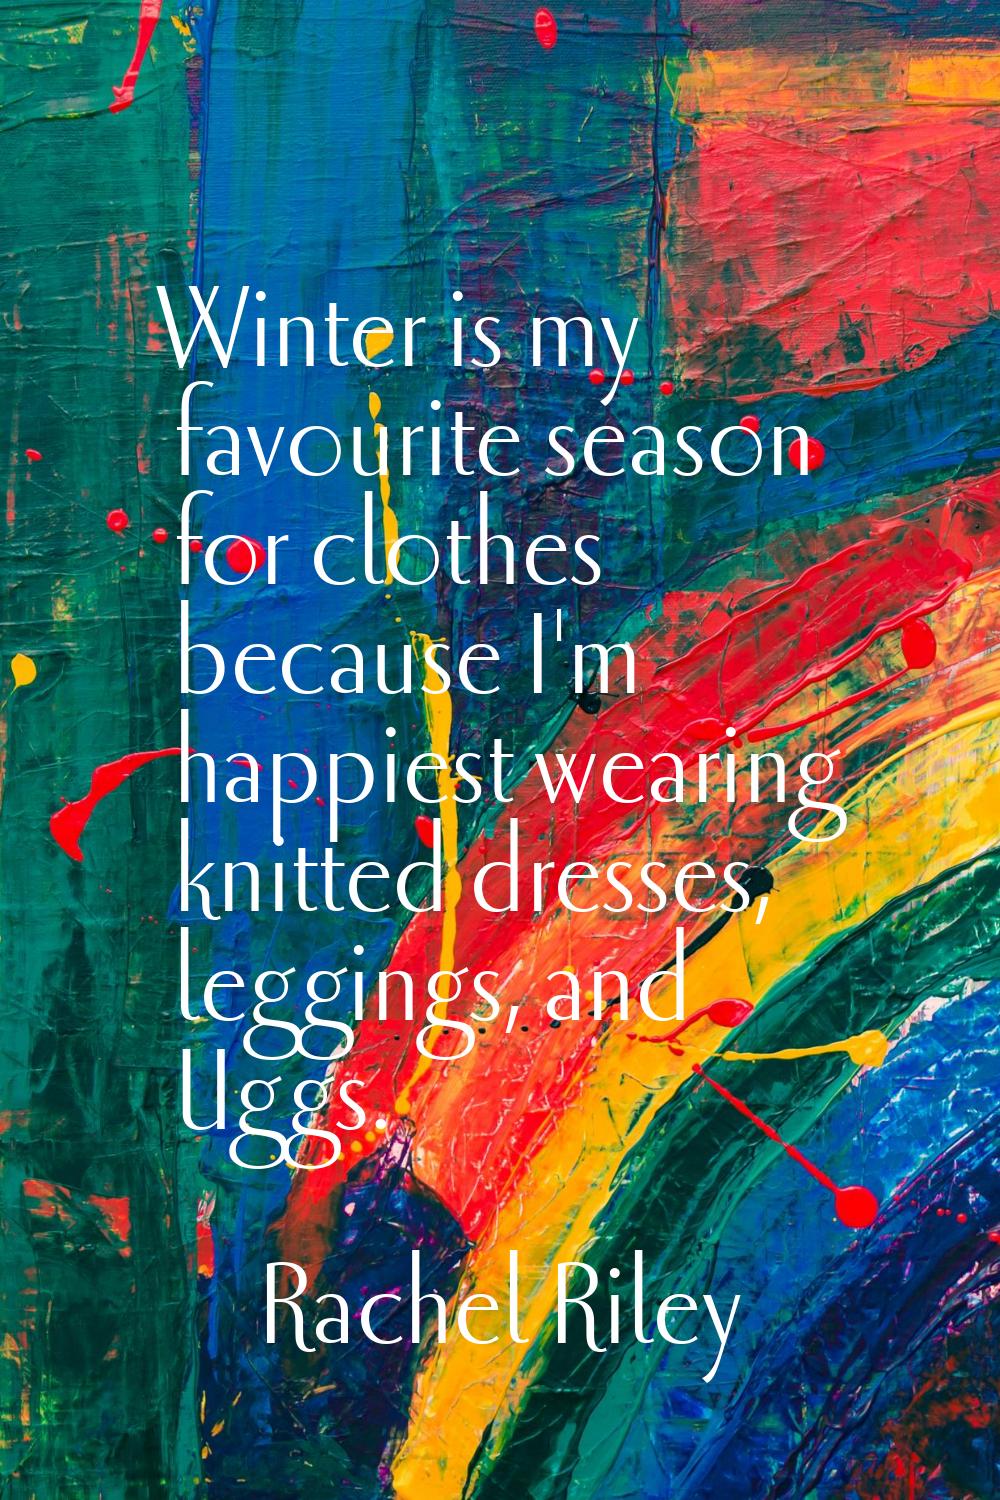 Winter is my favourite season for clothes because I'm happiest wearing knitted dresses, leggings, a